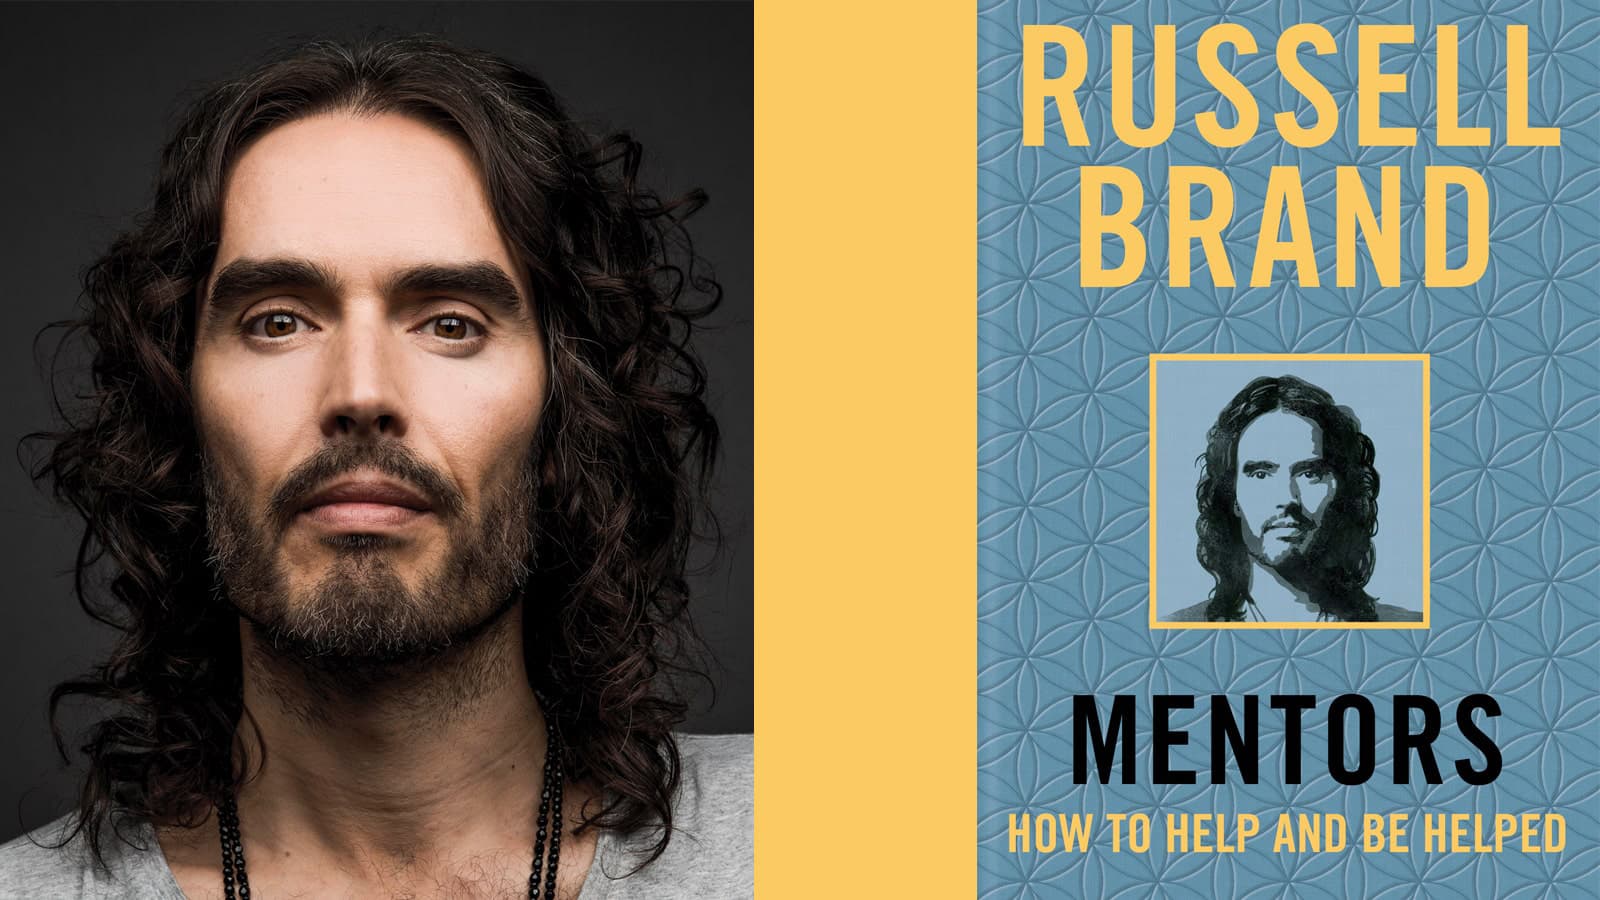 Russell Brand explores the impact mentoring can have on our lives in